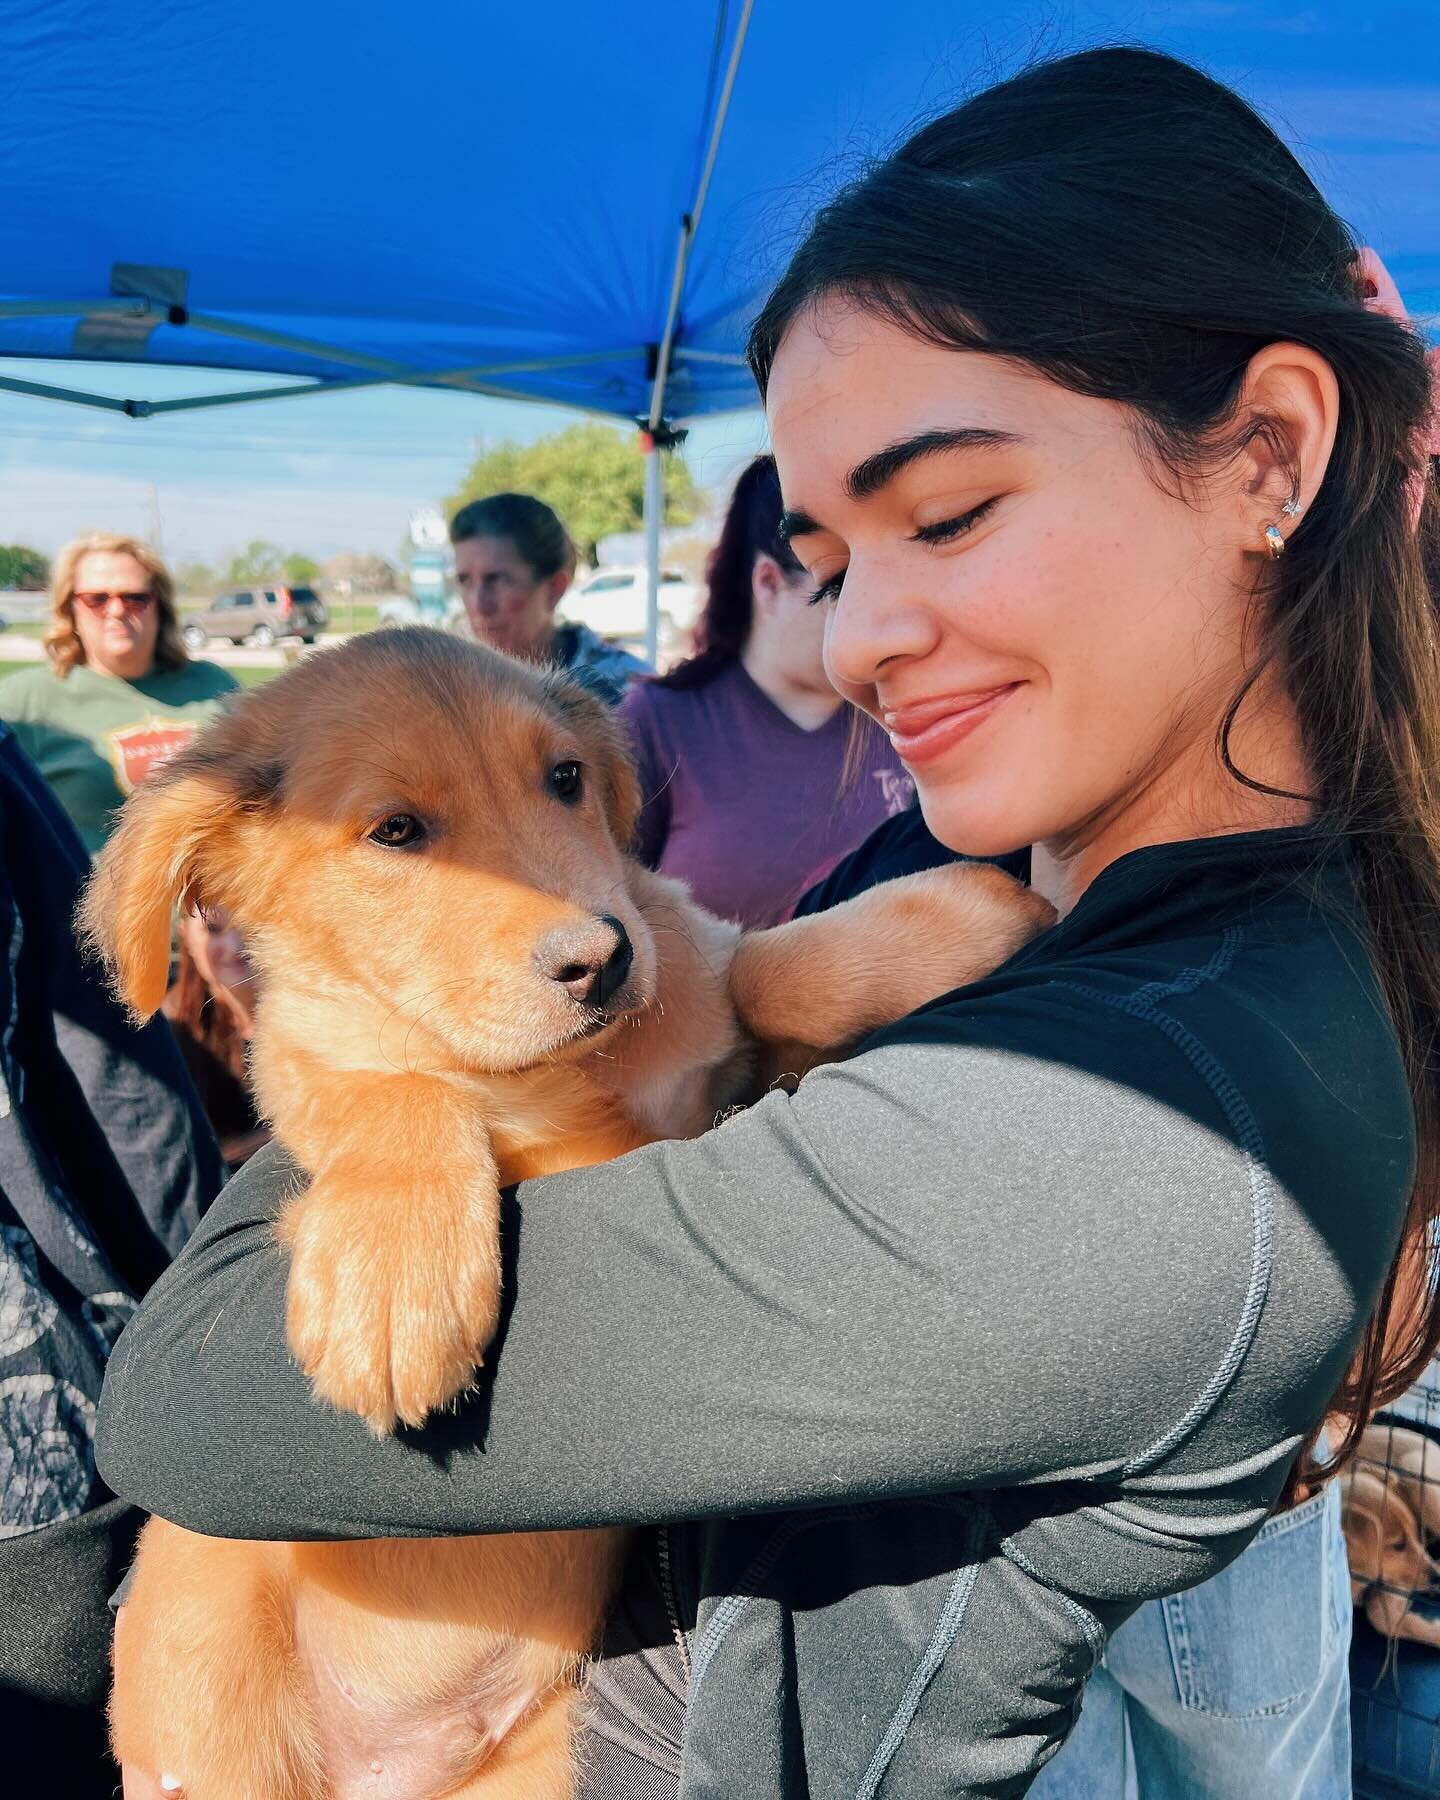 suns out pups out! we had the BEST time helping @urgentanimalsofhearne at their some bunny to love adoption event! 💐🌷🌸

check out their facebook page for available pups and cats if interested! #adoptdontshop